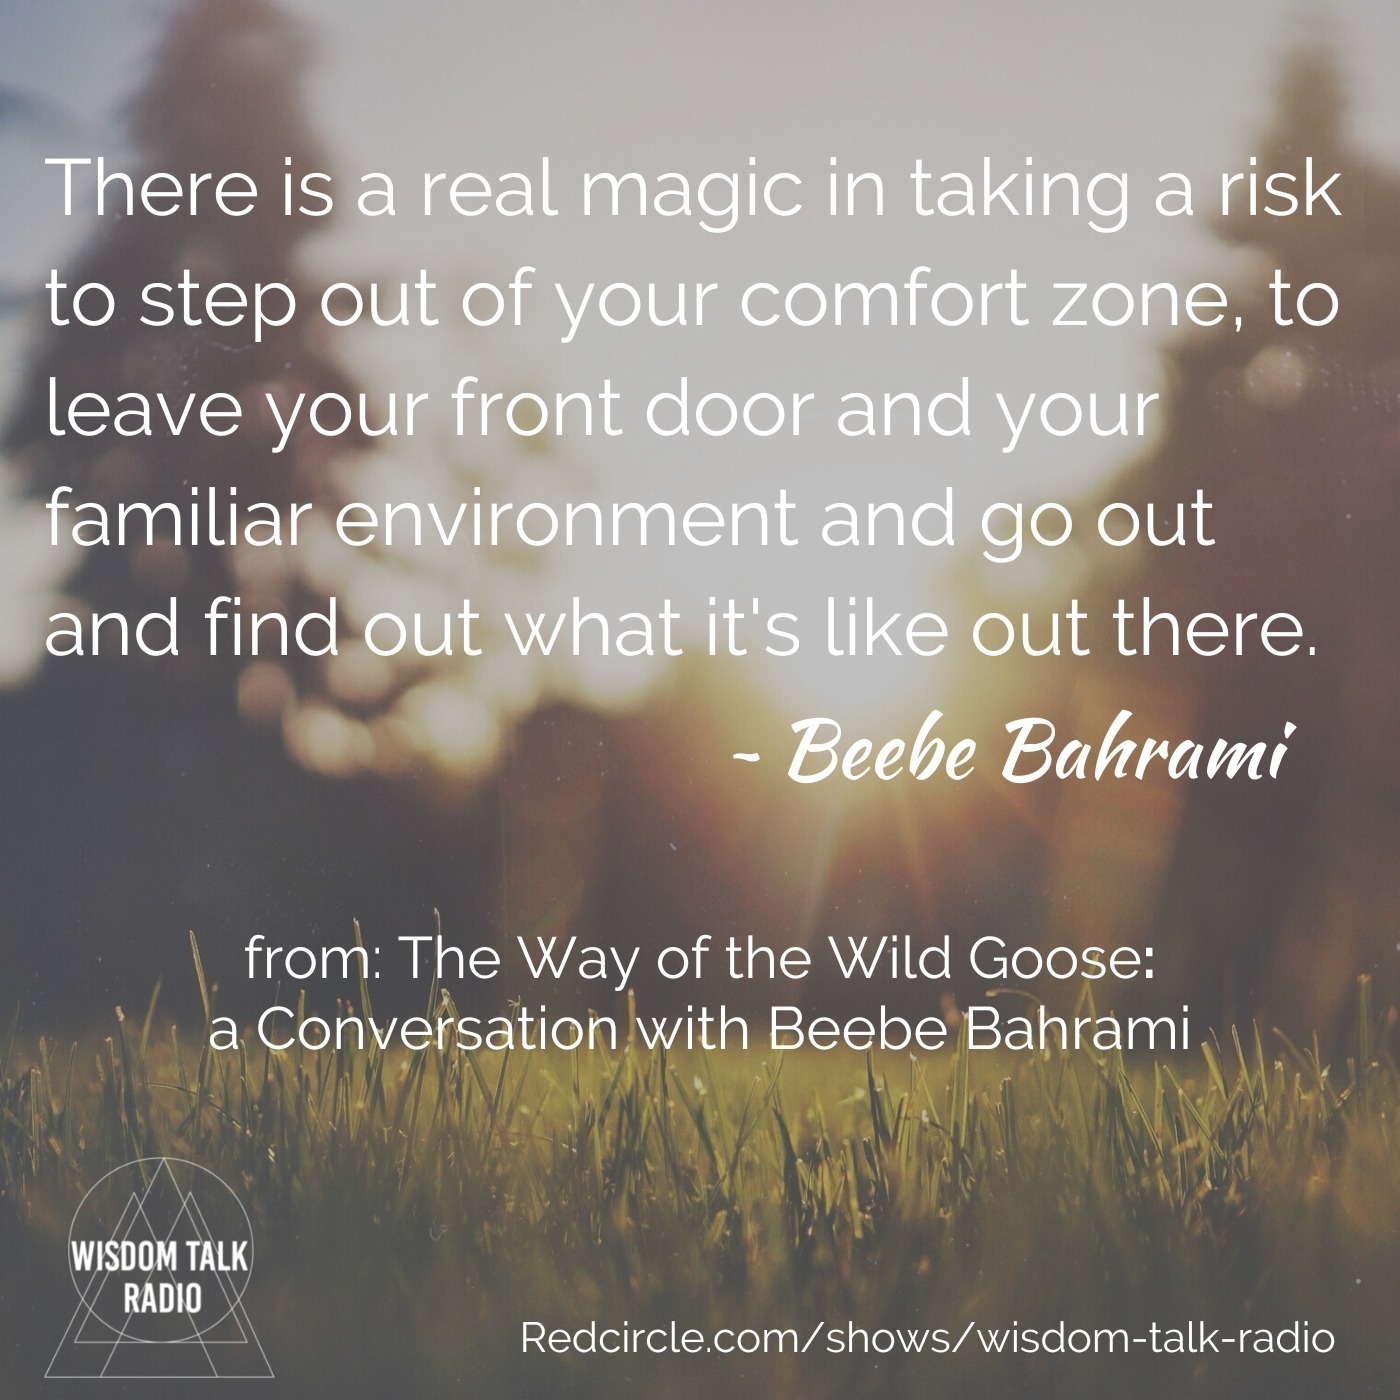 The Way of the Wild Goose: a Conversation with Beebe Bahrami